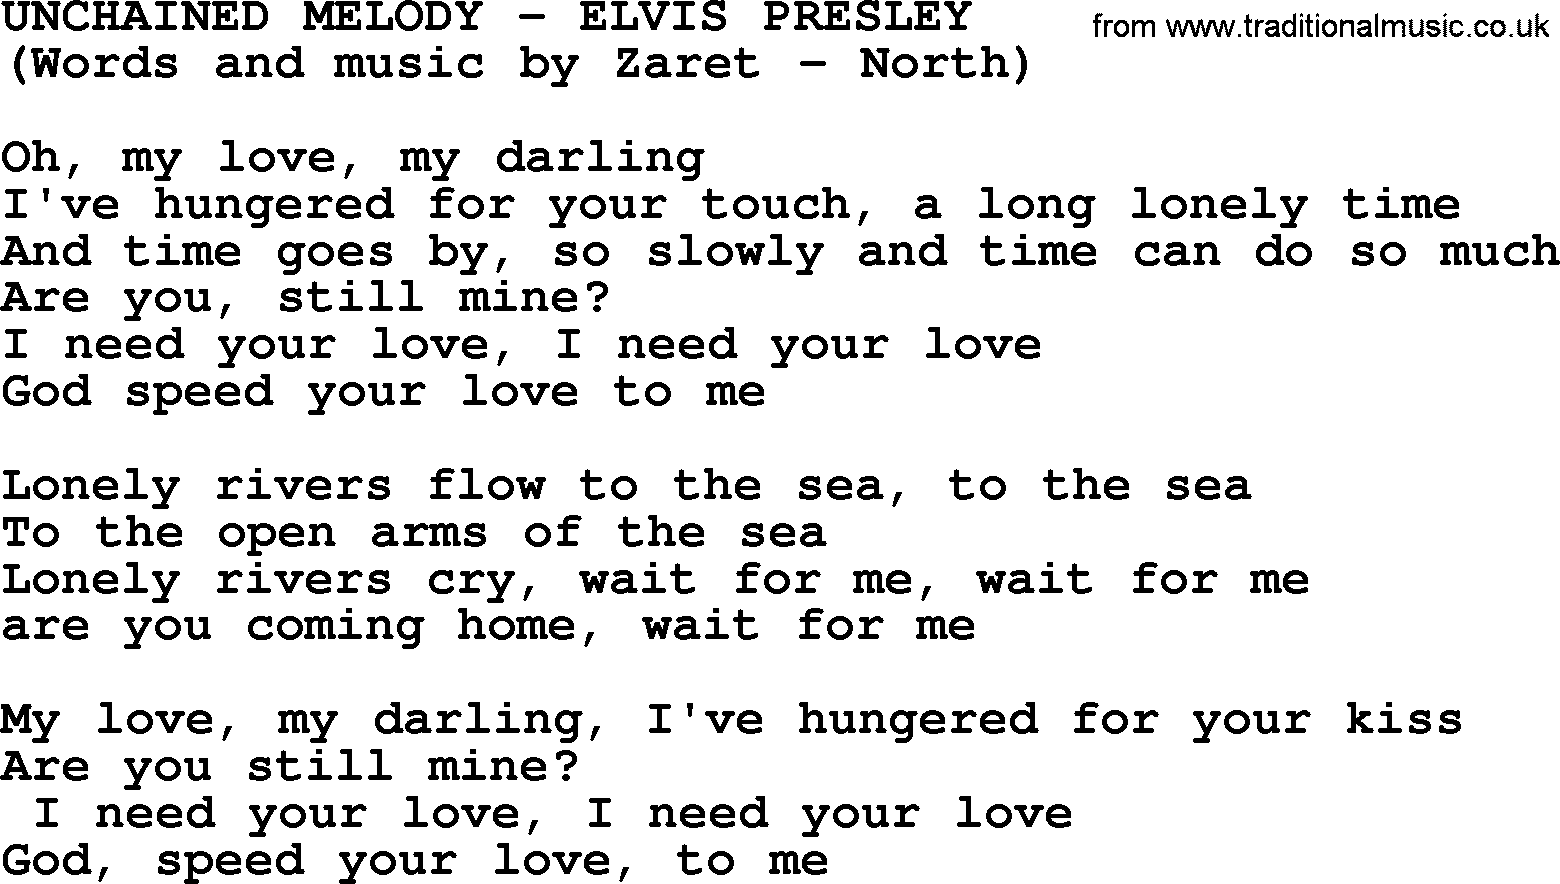 Elvis Presley song: Unchained Melody lyrics